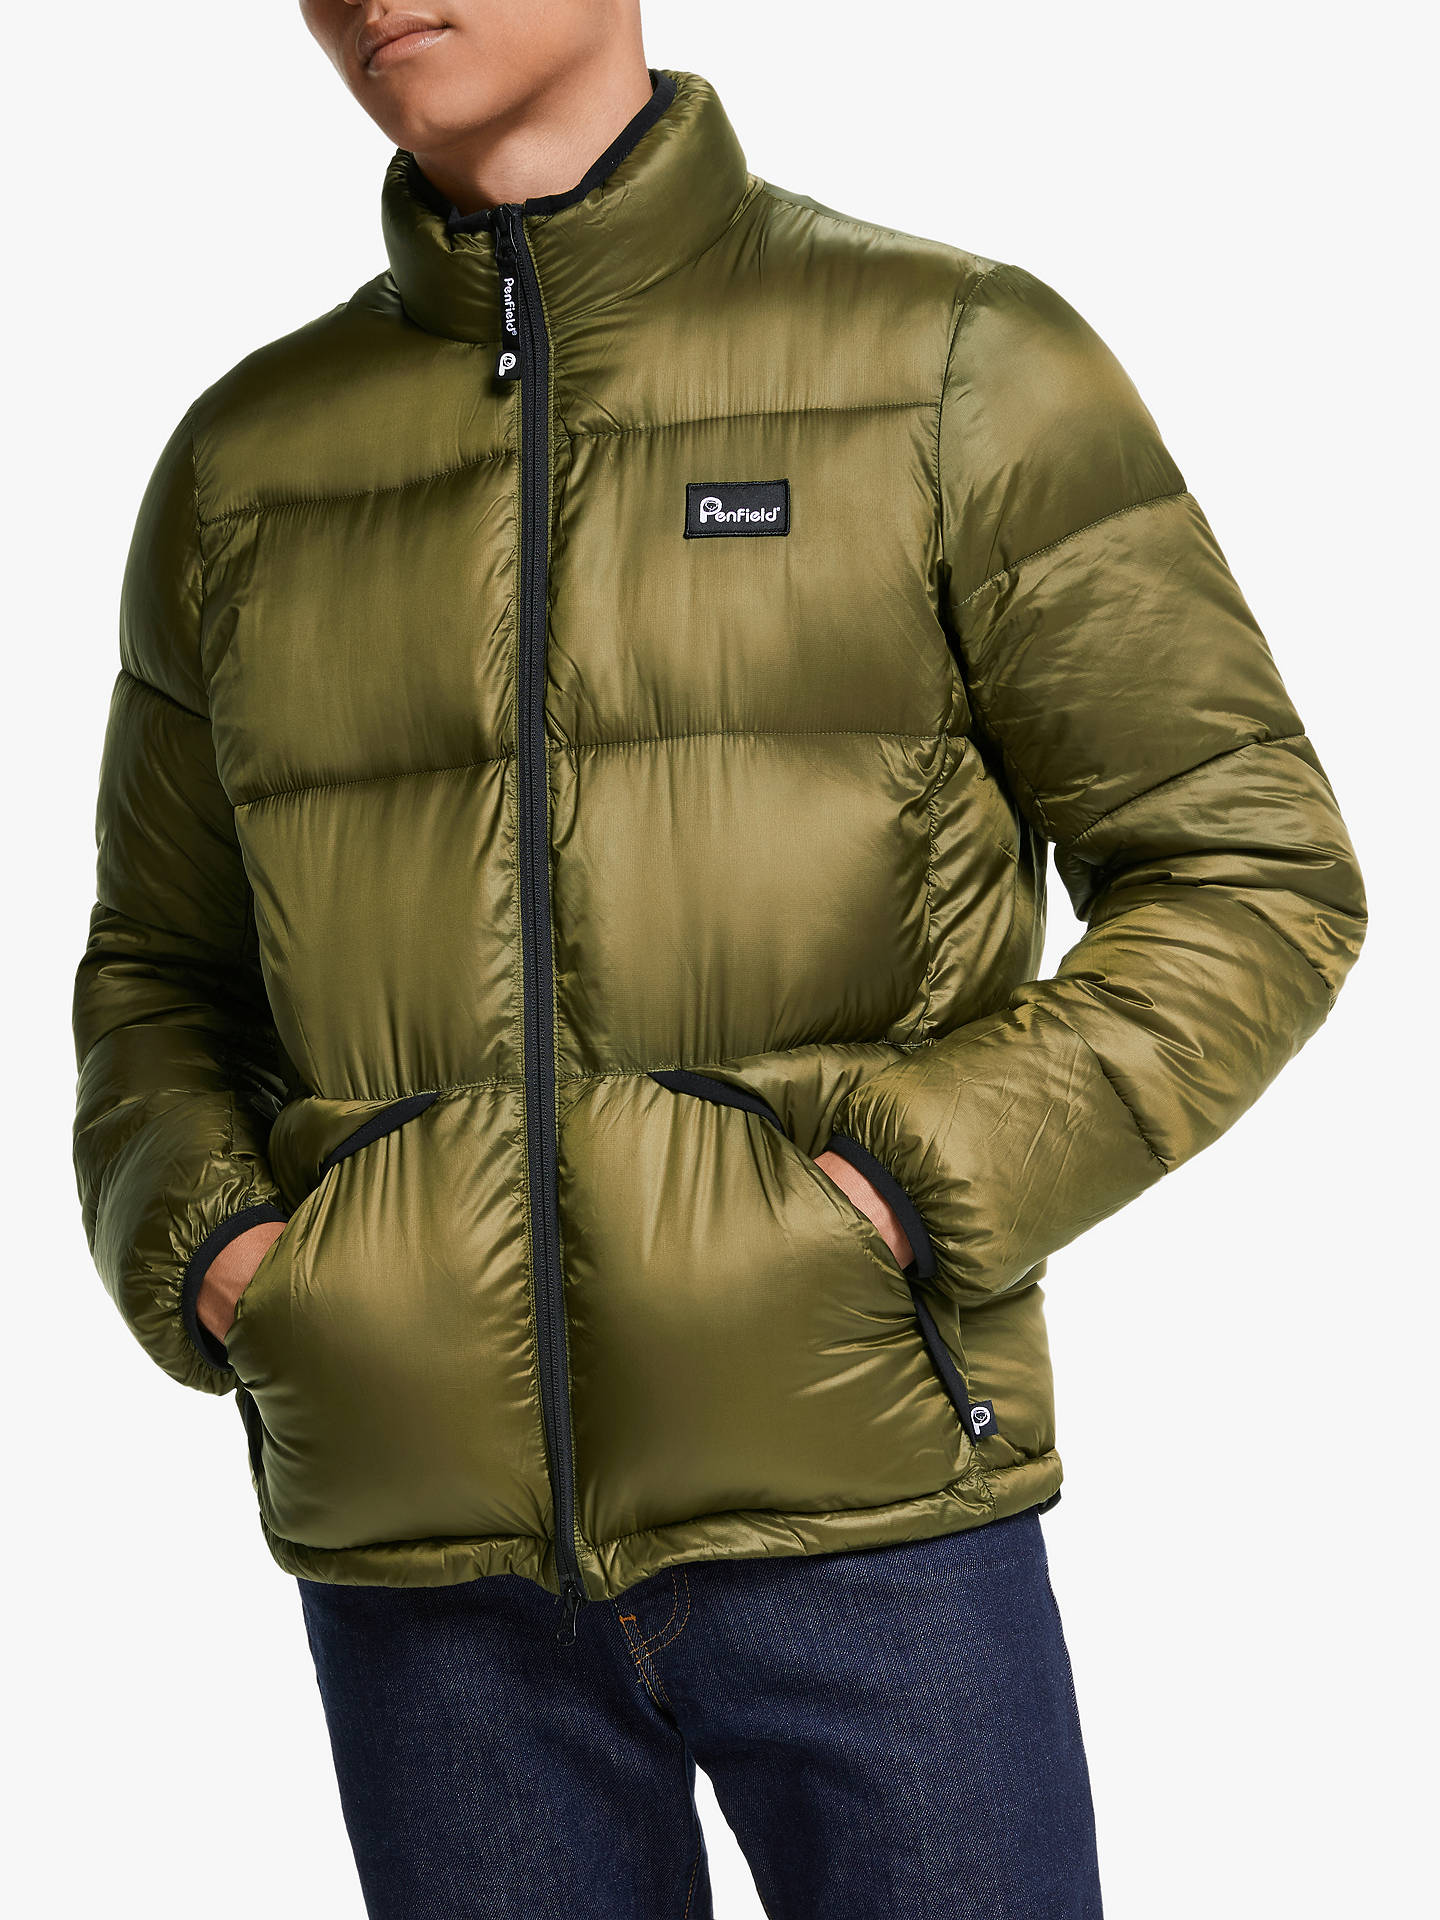 Penfield Walkabout Puffer Jacket at John Lewis & Partners